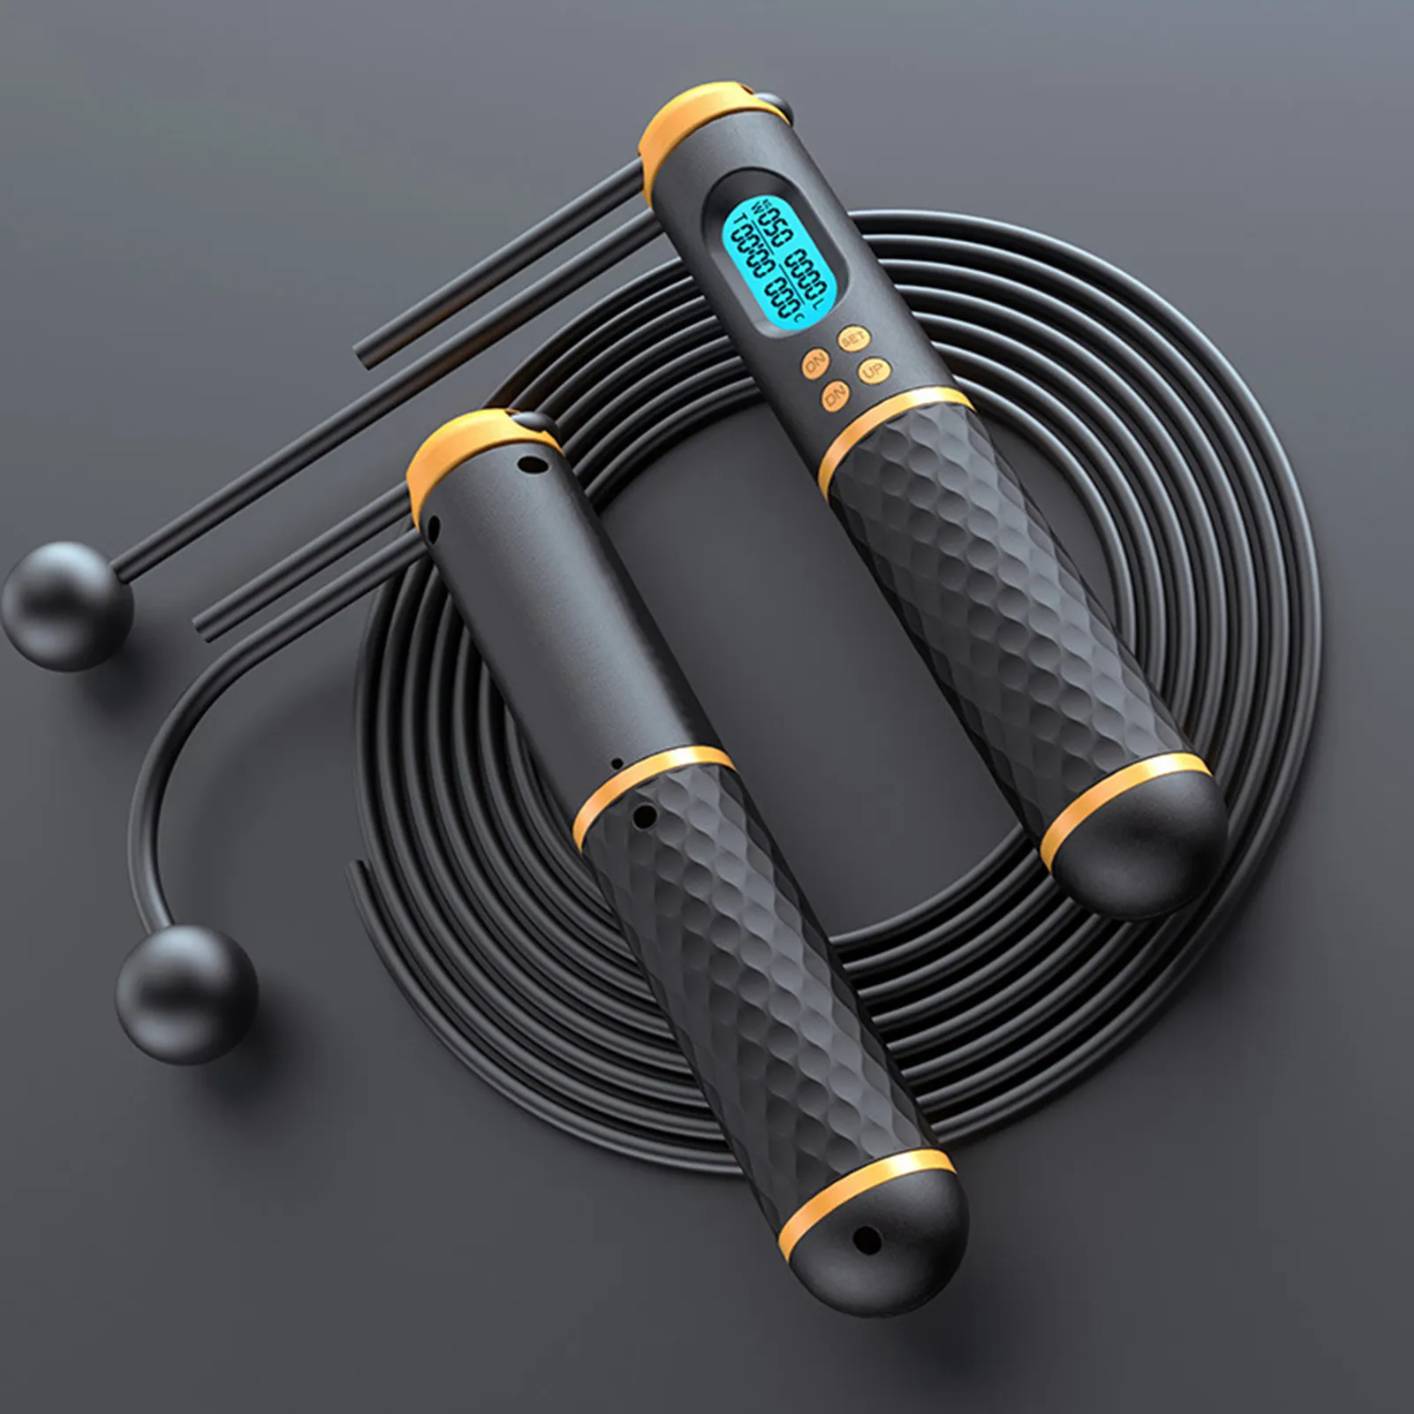 2-in-1 Jump Rope Intelligent Cordless Skipping Rope Digital Counter Gym Rope Weight Loss Training Speed Rope For Fitness Workout